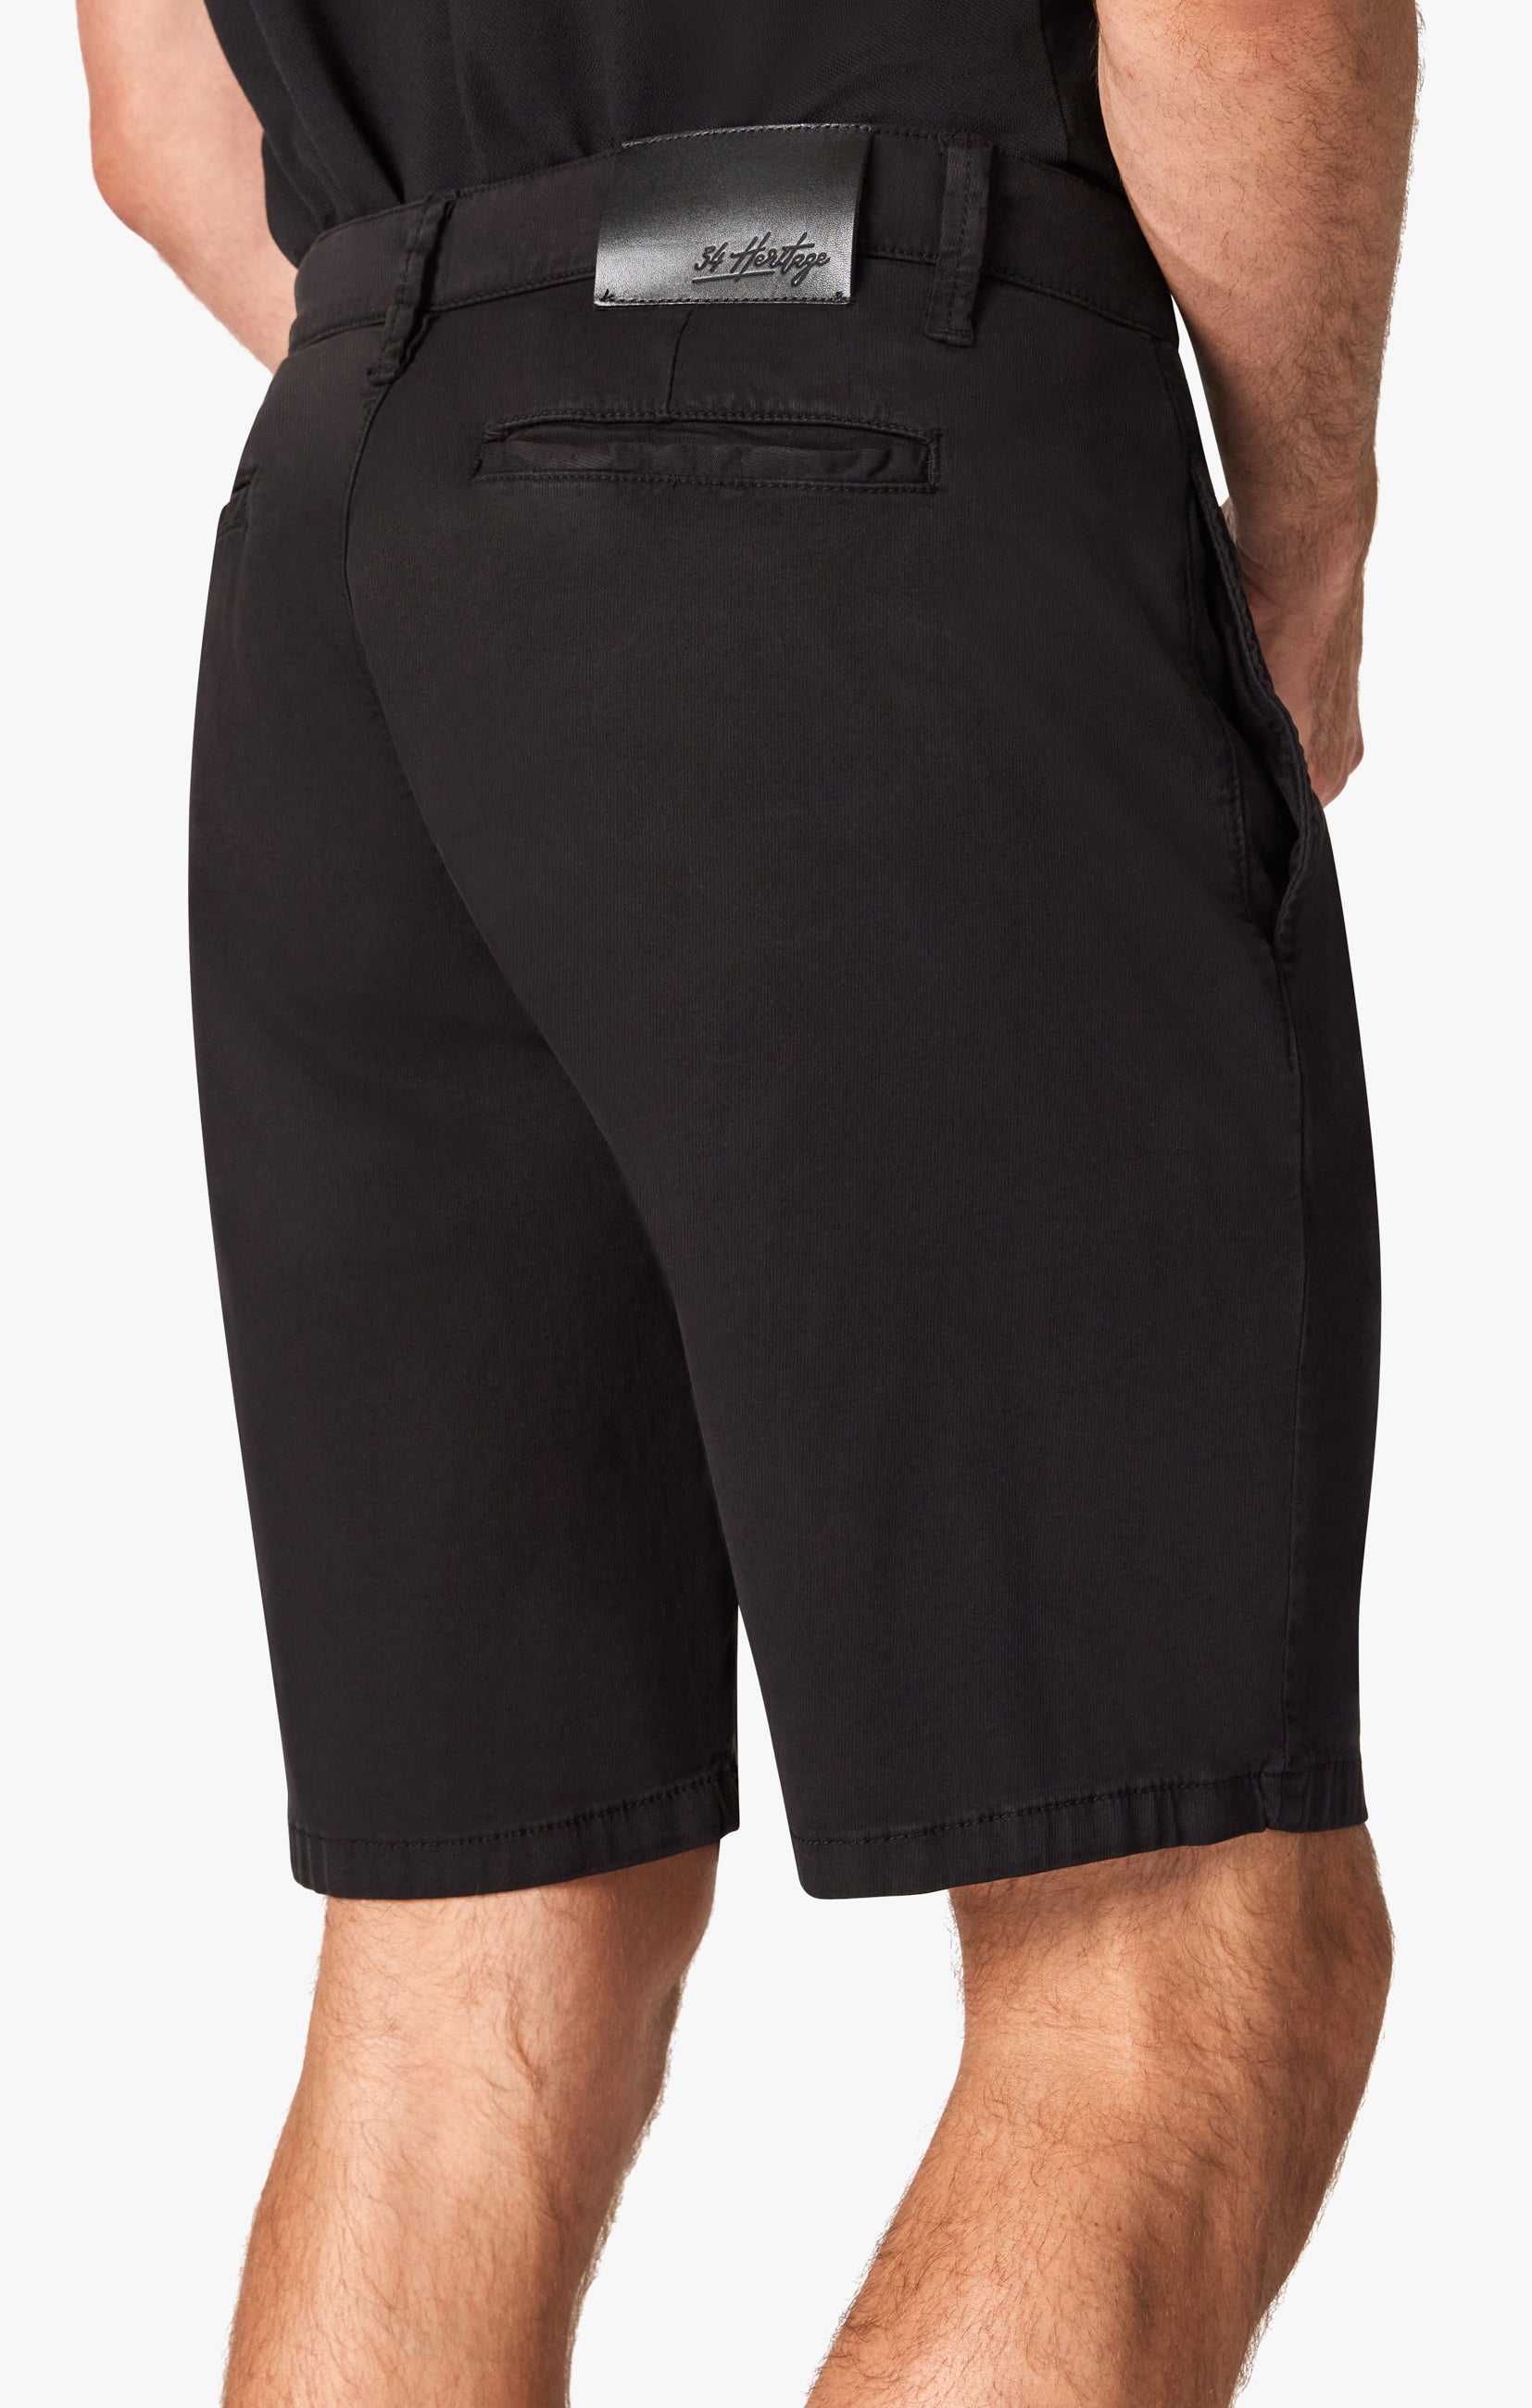 Nevada Shorts In Black Soft Touch Image 3